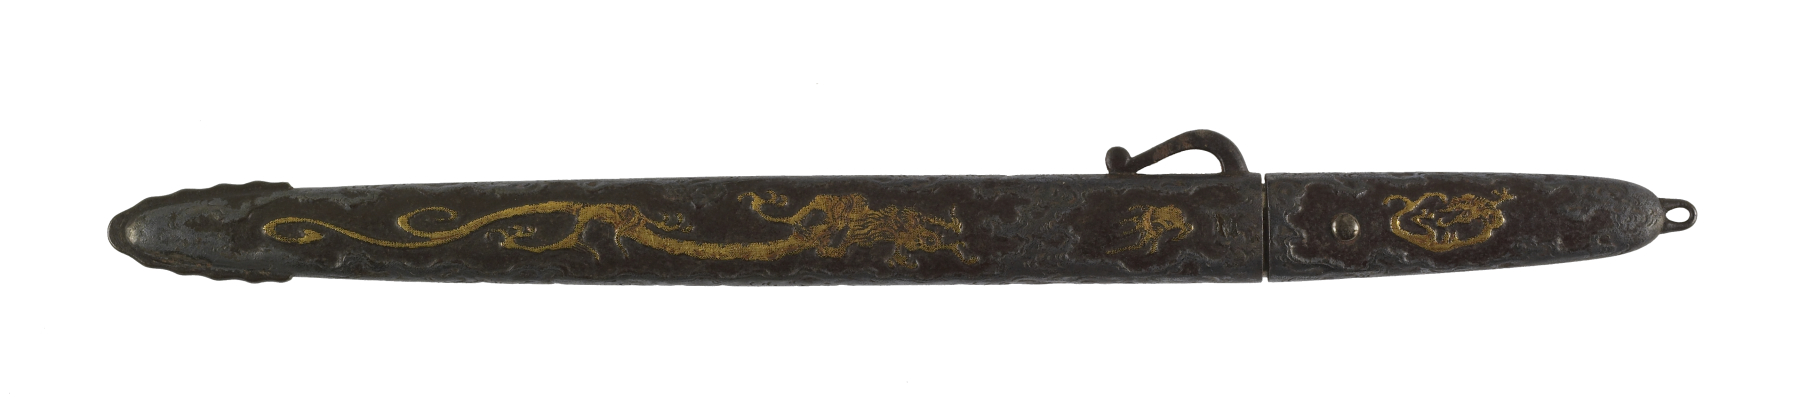 Image for Kozuka mounted as a knife with dragon and cloud designs